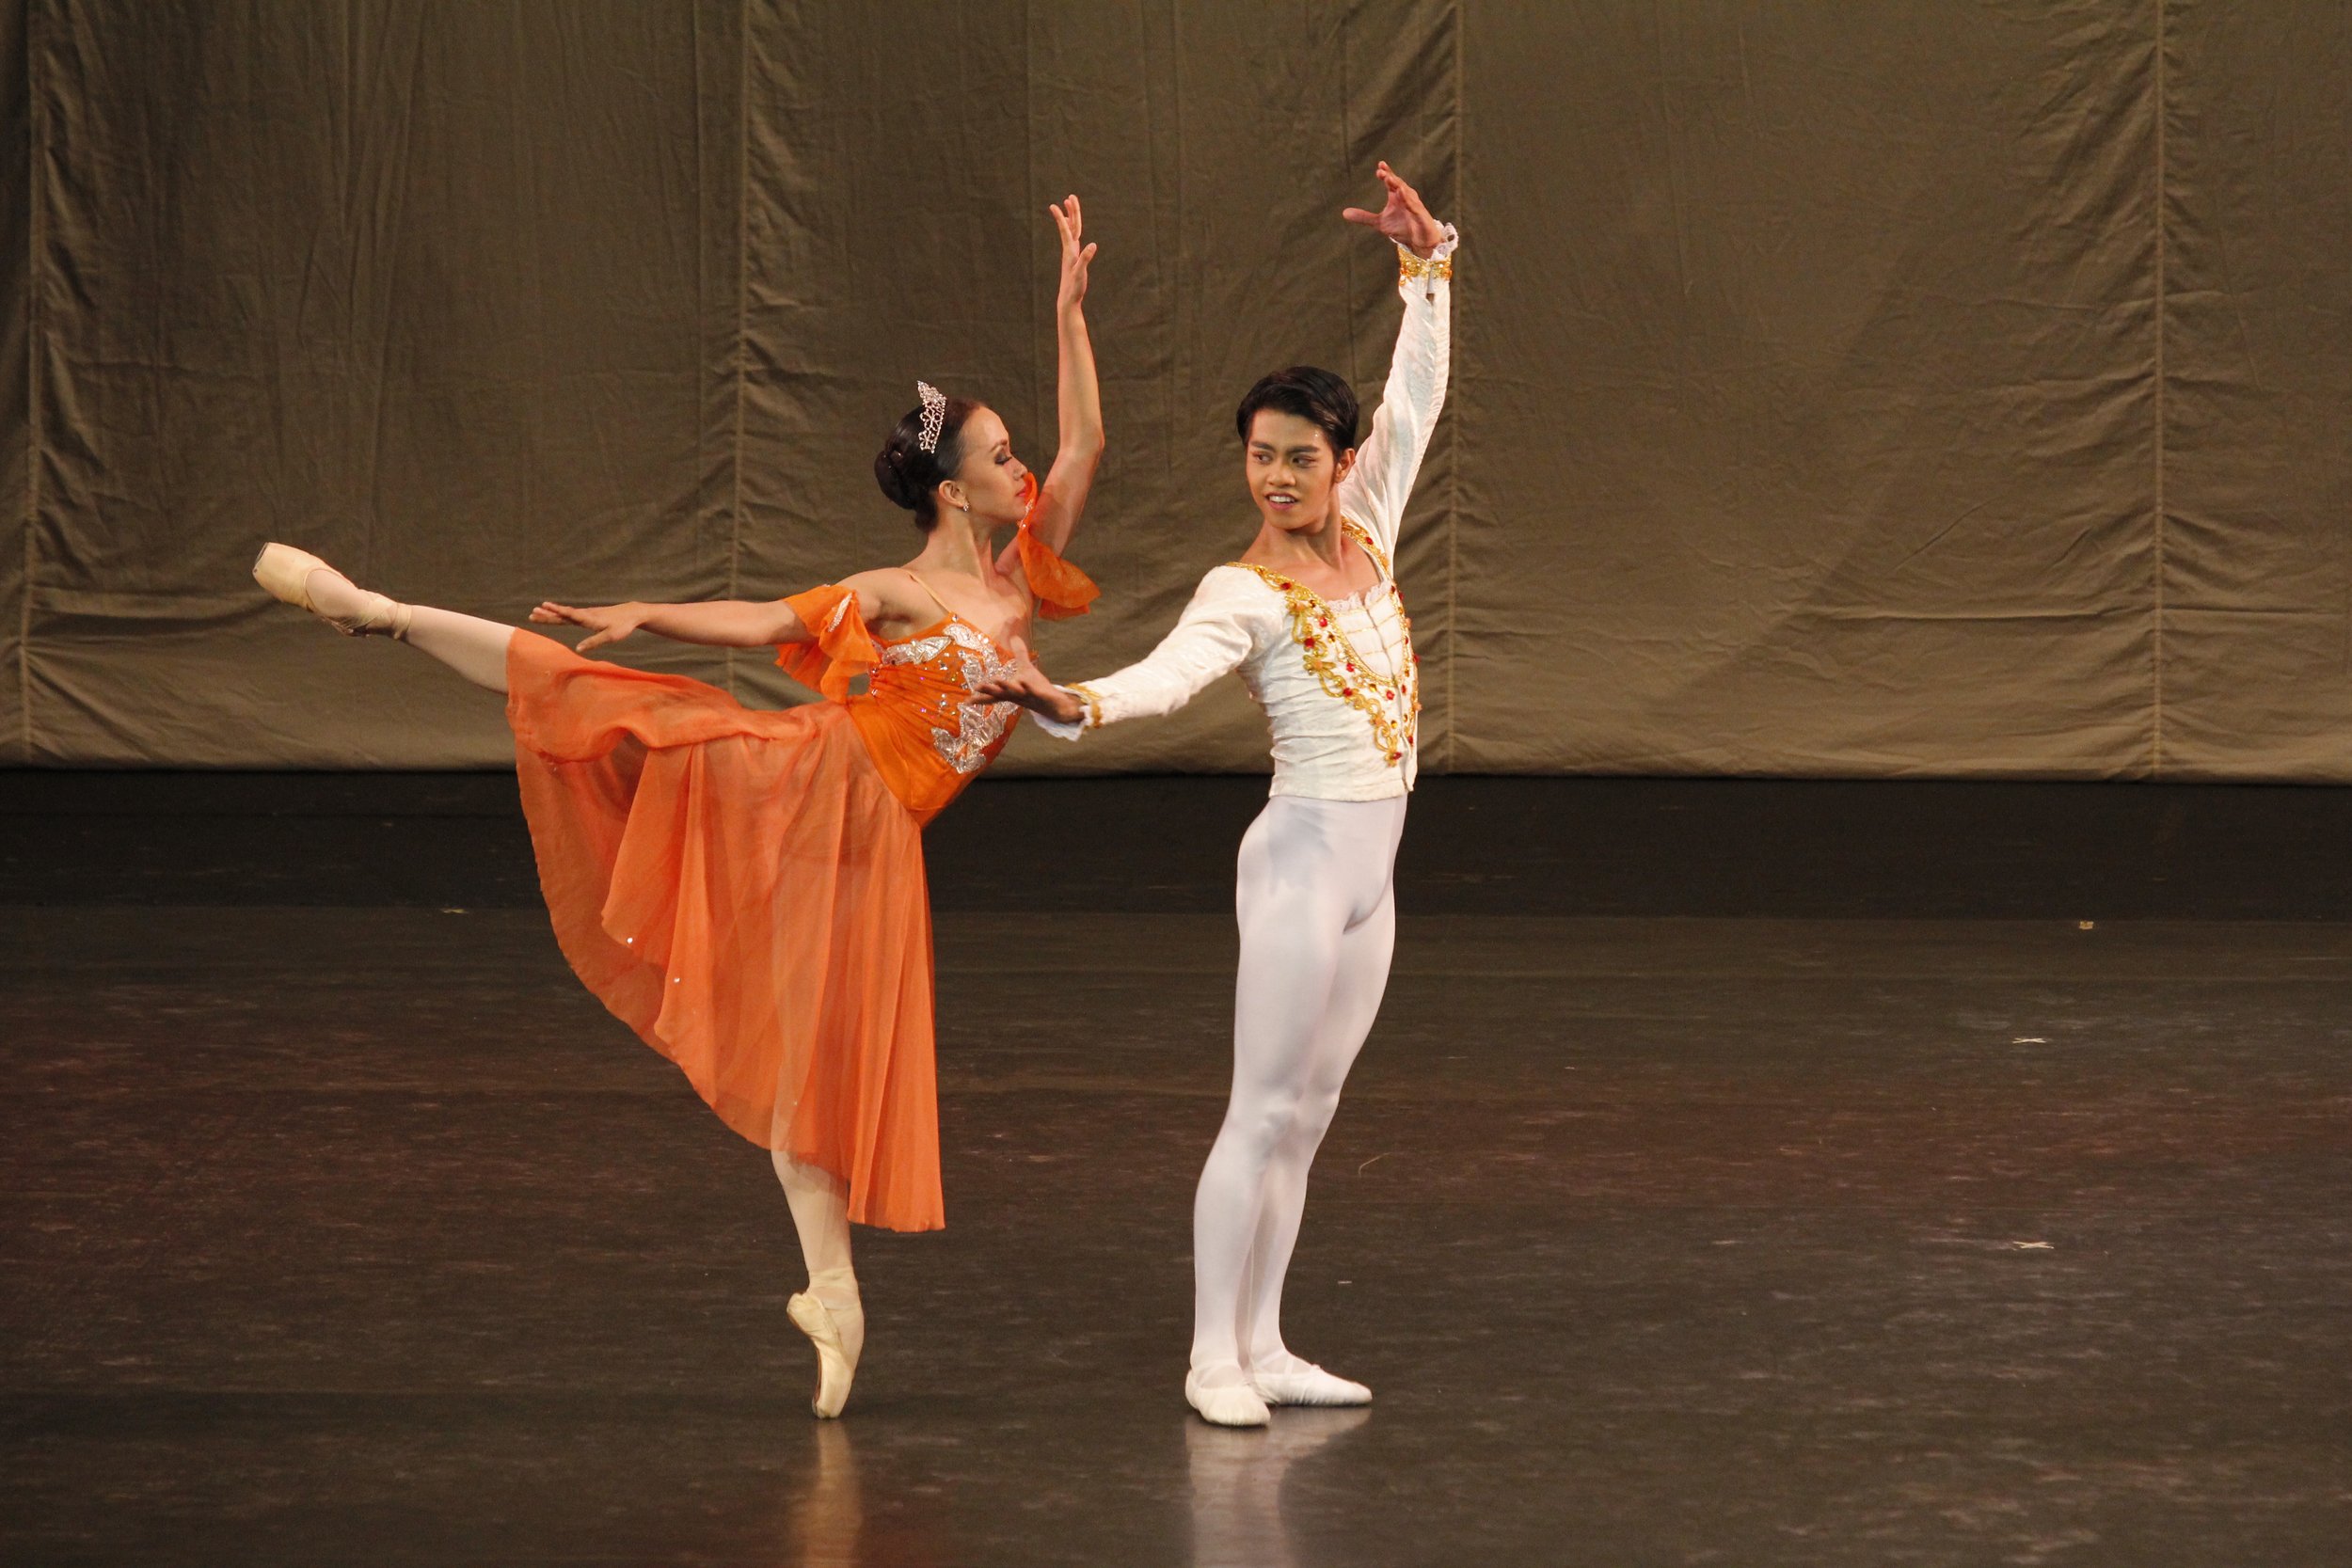    Jessa Balote and Anselmo Dictado make a perfect balancing act, she in a flowy neon orange tutu and he in a pristine all-white outfit – the vivid contrasting with the neutral – in the neoclassical  Dancing to Verdi  by Tony Fabella. The Ballet Mani